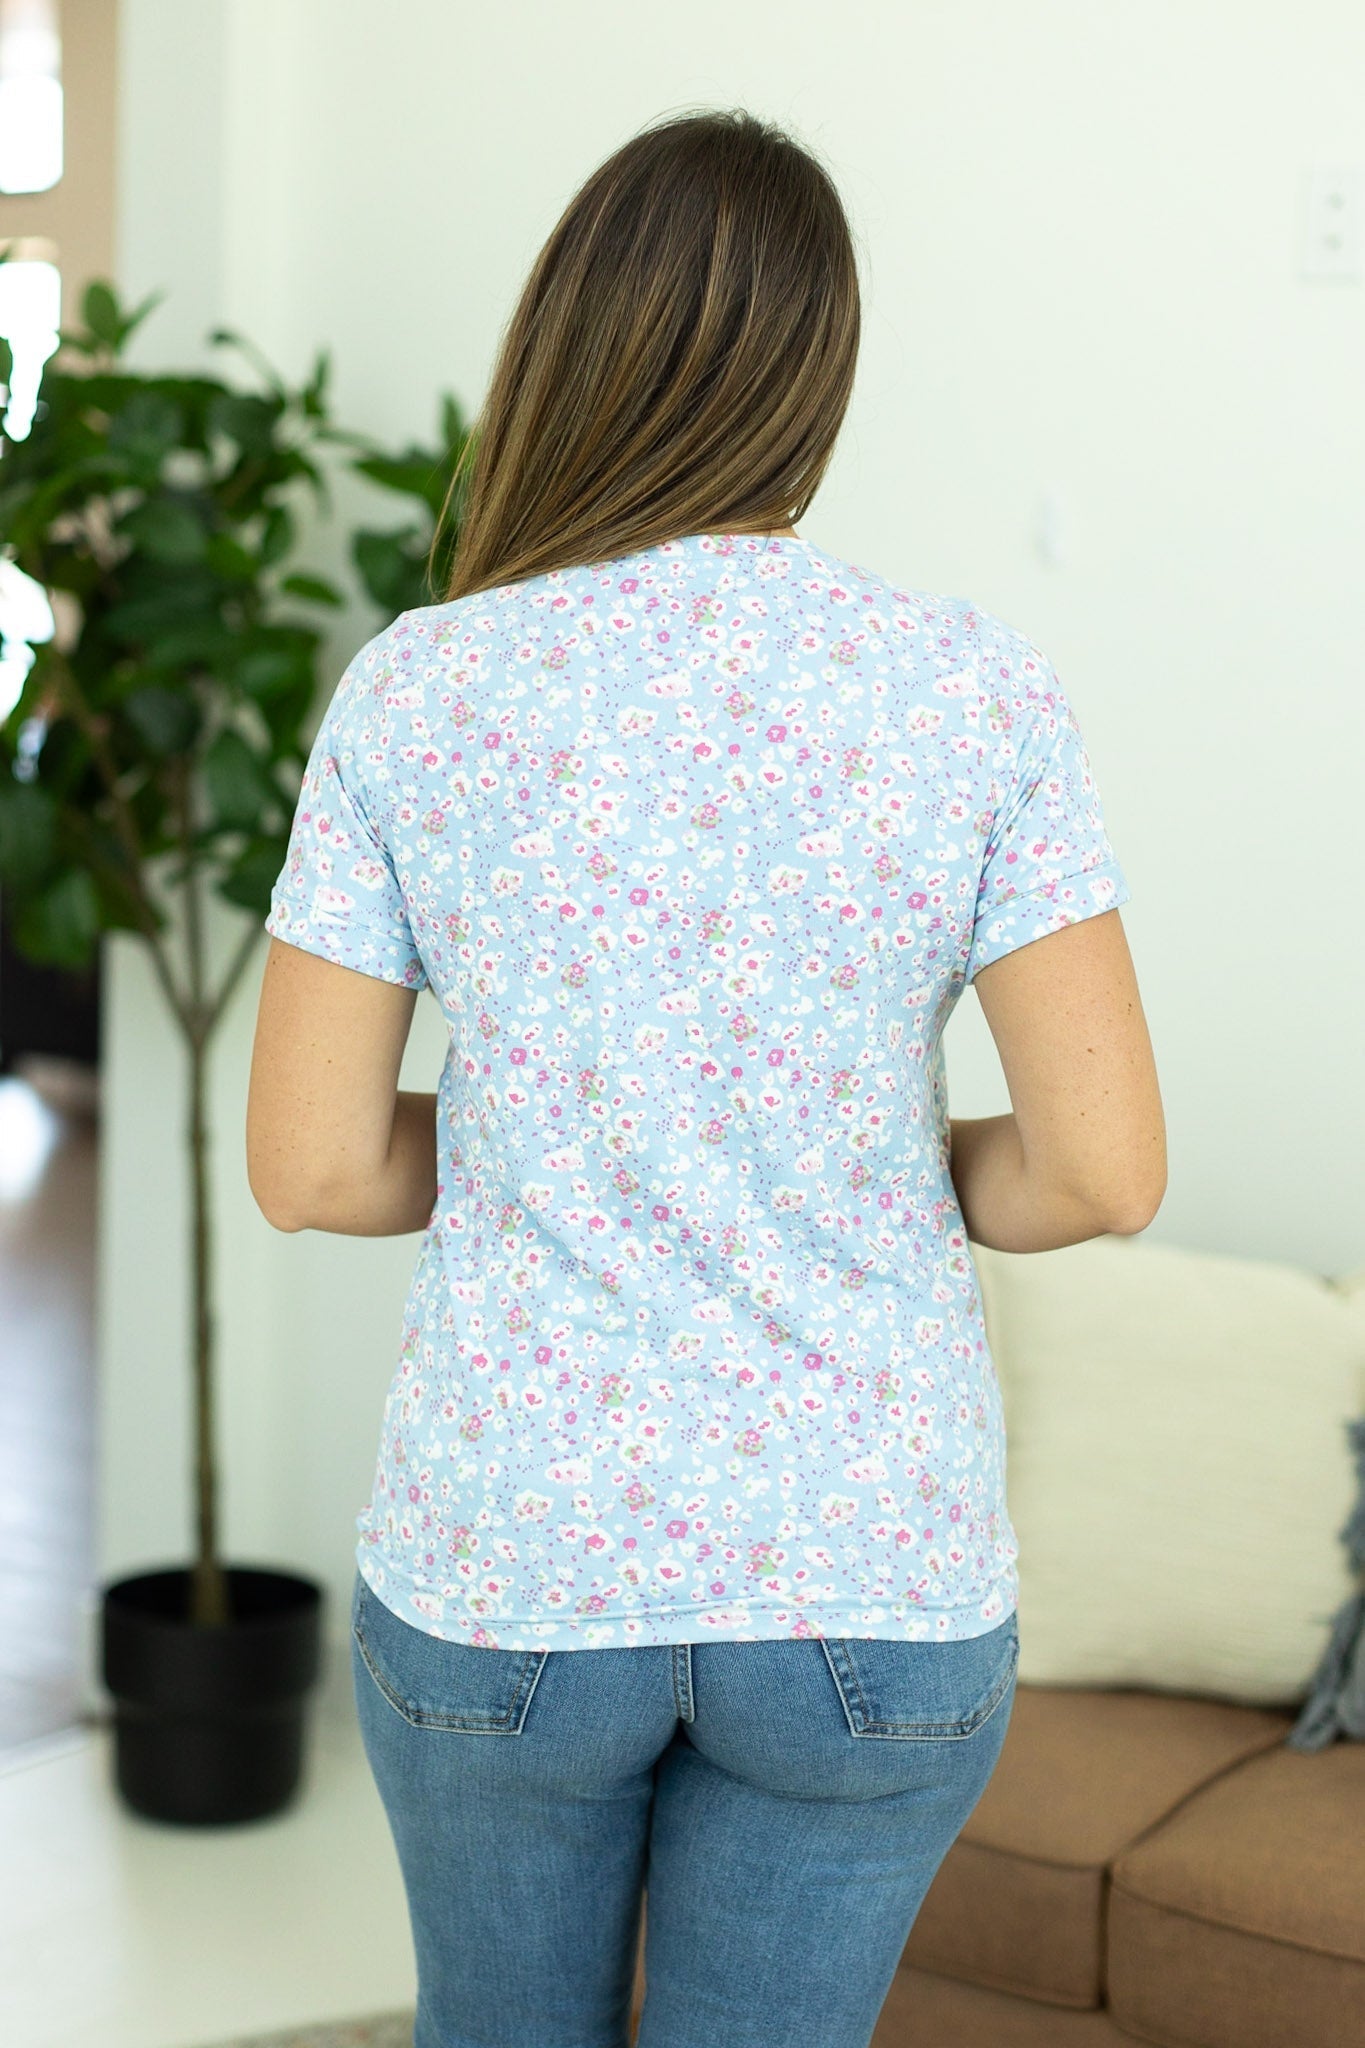 Sophie Pocket Tee - Blue and Pink Abstract